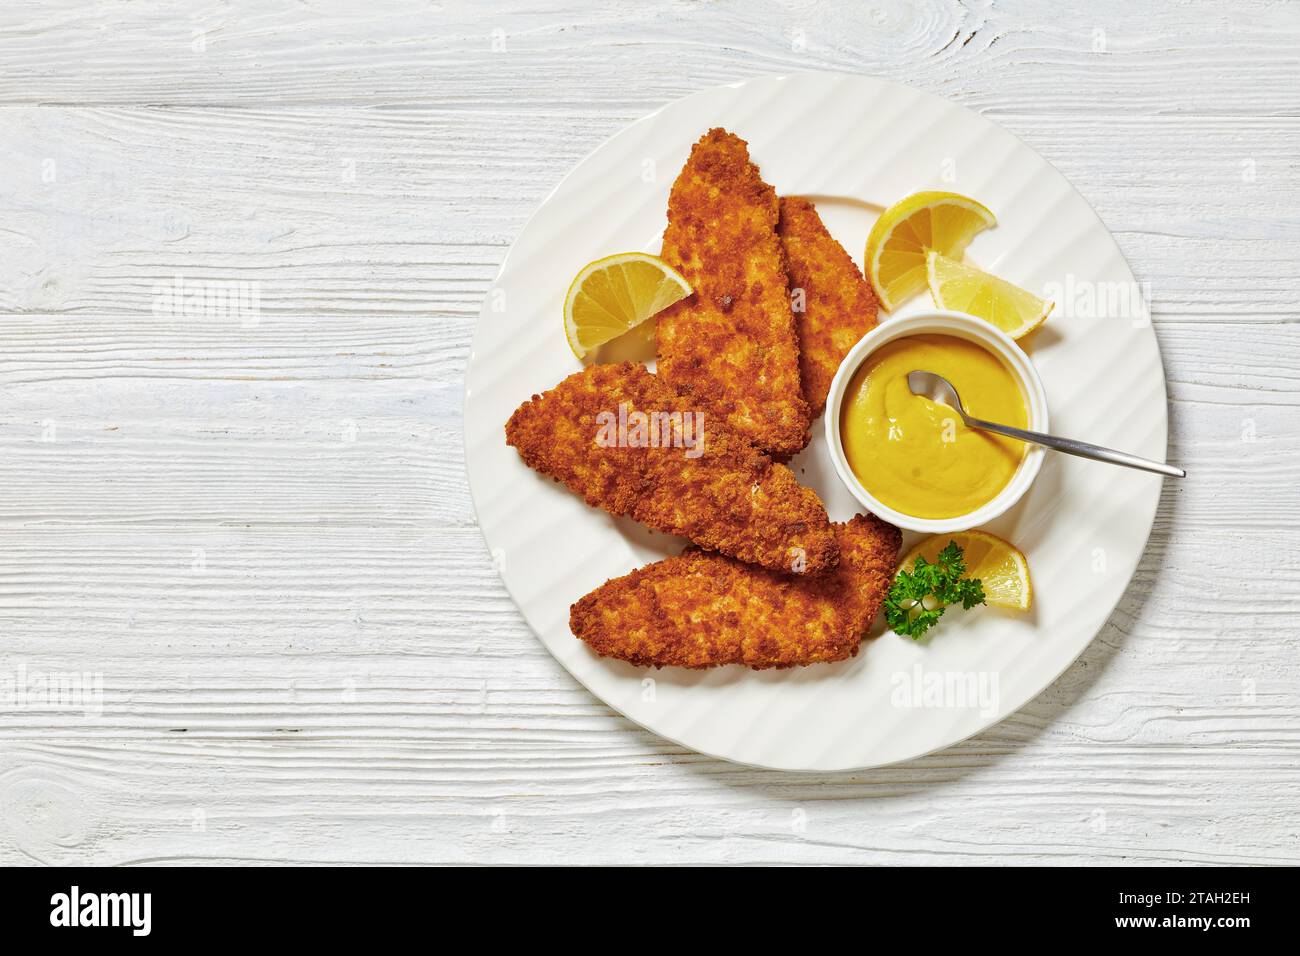 baked in oven breaded fish fillet served with yellow mustard and lemon slices on white plate on white wooden table, flat lay, free space Stock Photo